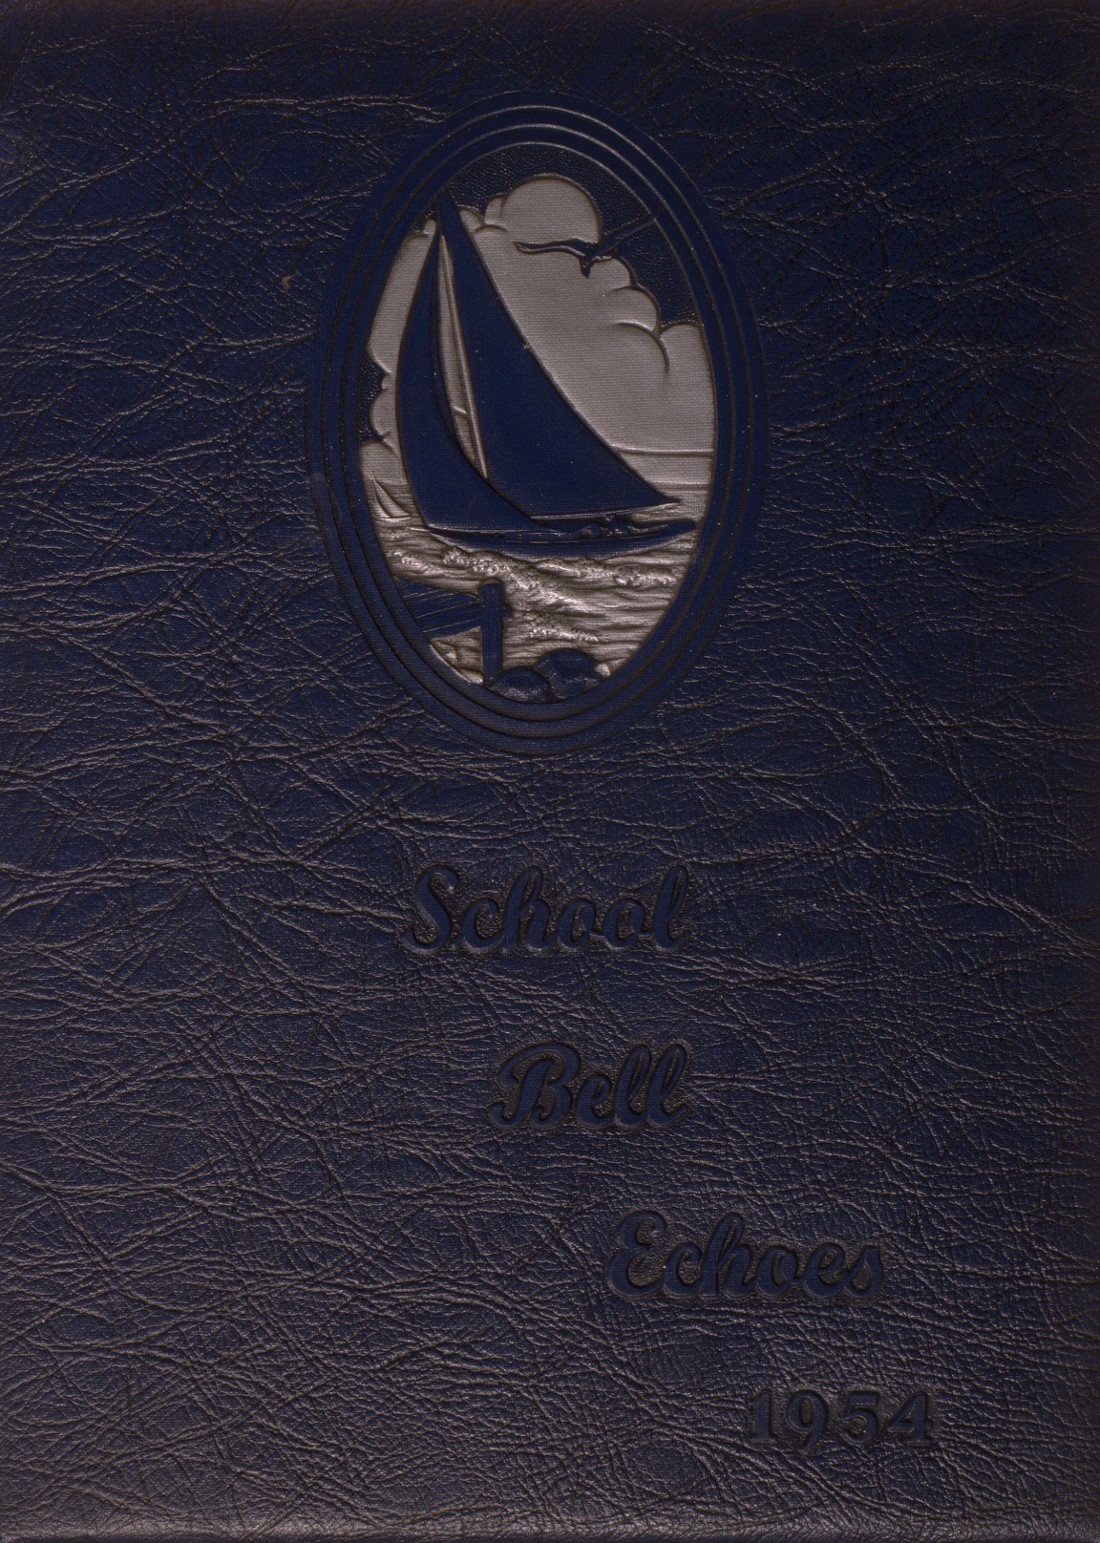 1954-yearbook-from-baugo-township-school-from-elkhart-indiana-for-sale